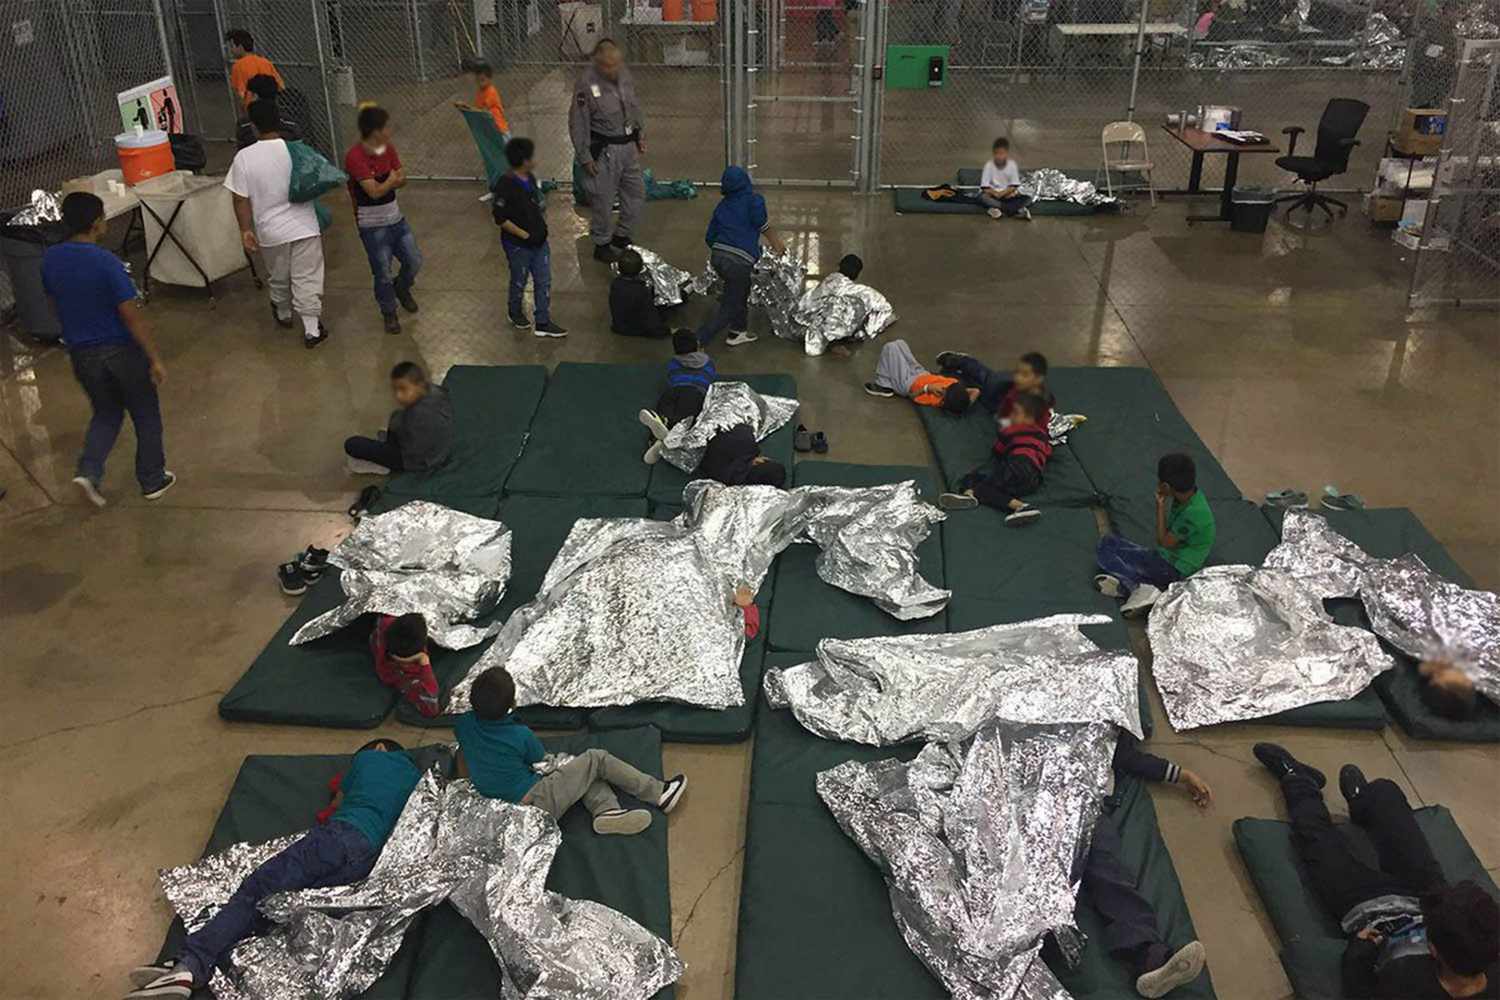 McAllen processing center for people crossing the US border., USA - 18 Jun 2018